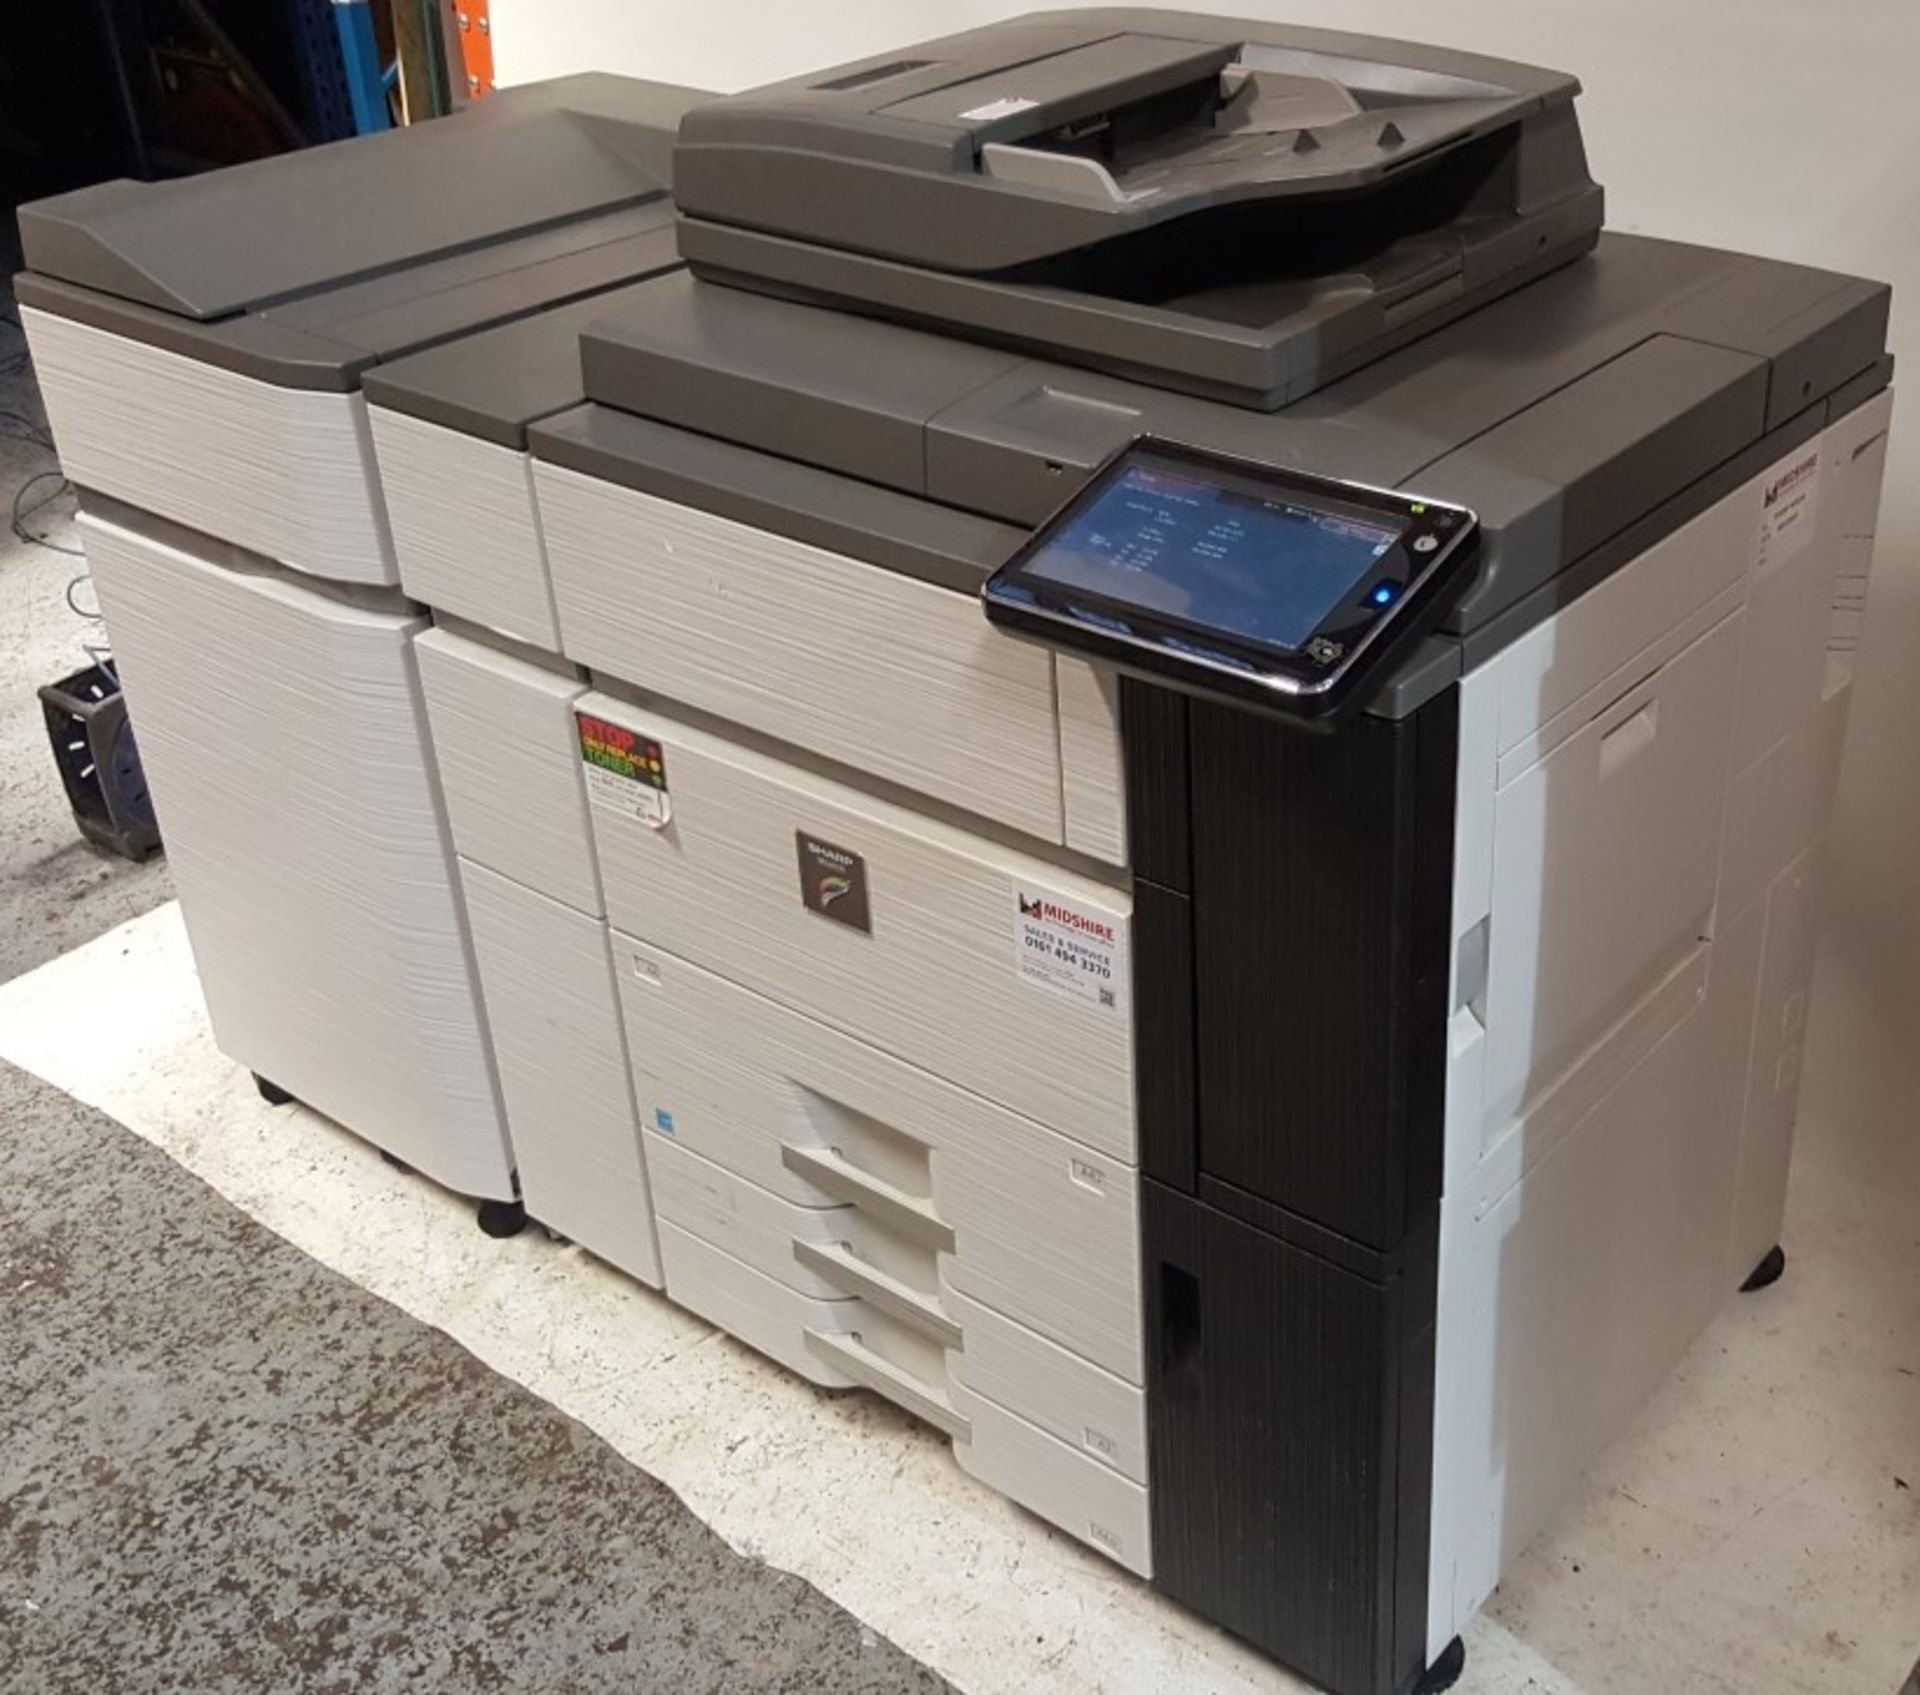 1 x Sharp MX6240N Office Printer + Saddle Stitch Finisher & Curl Correction Unit - CL452 -REF:Ref706 - Image 3 of 9